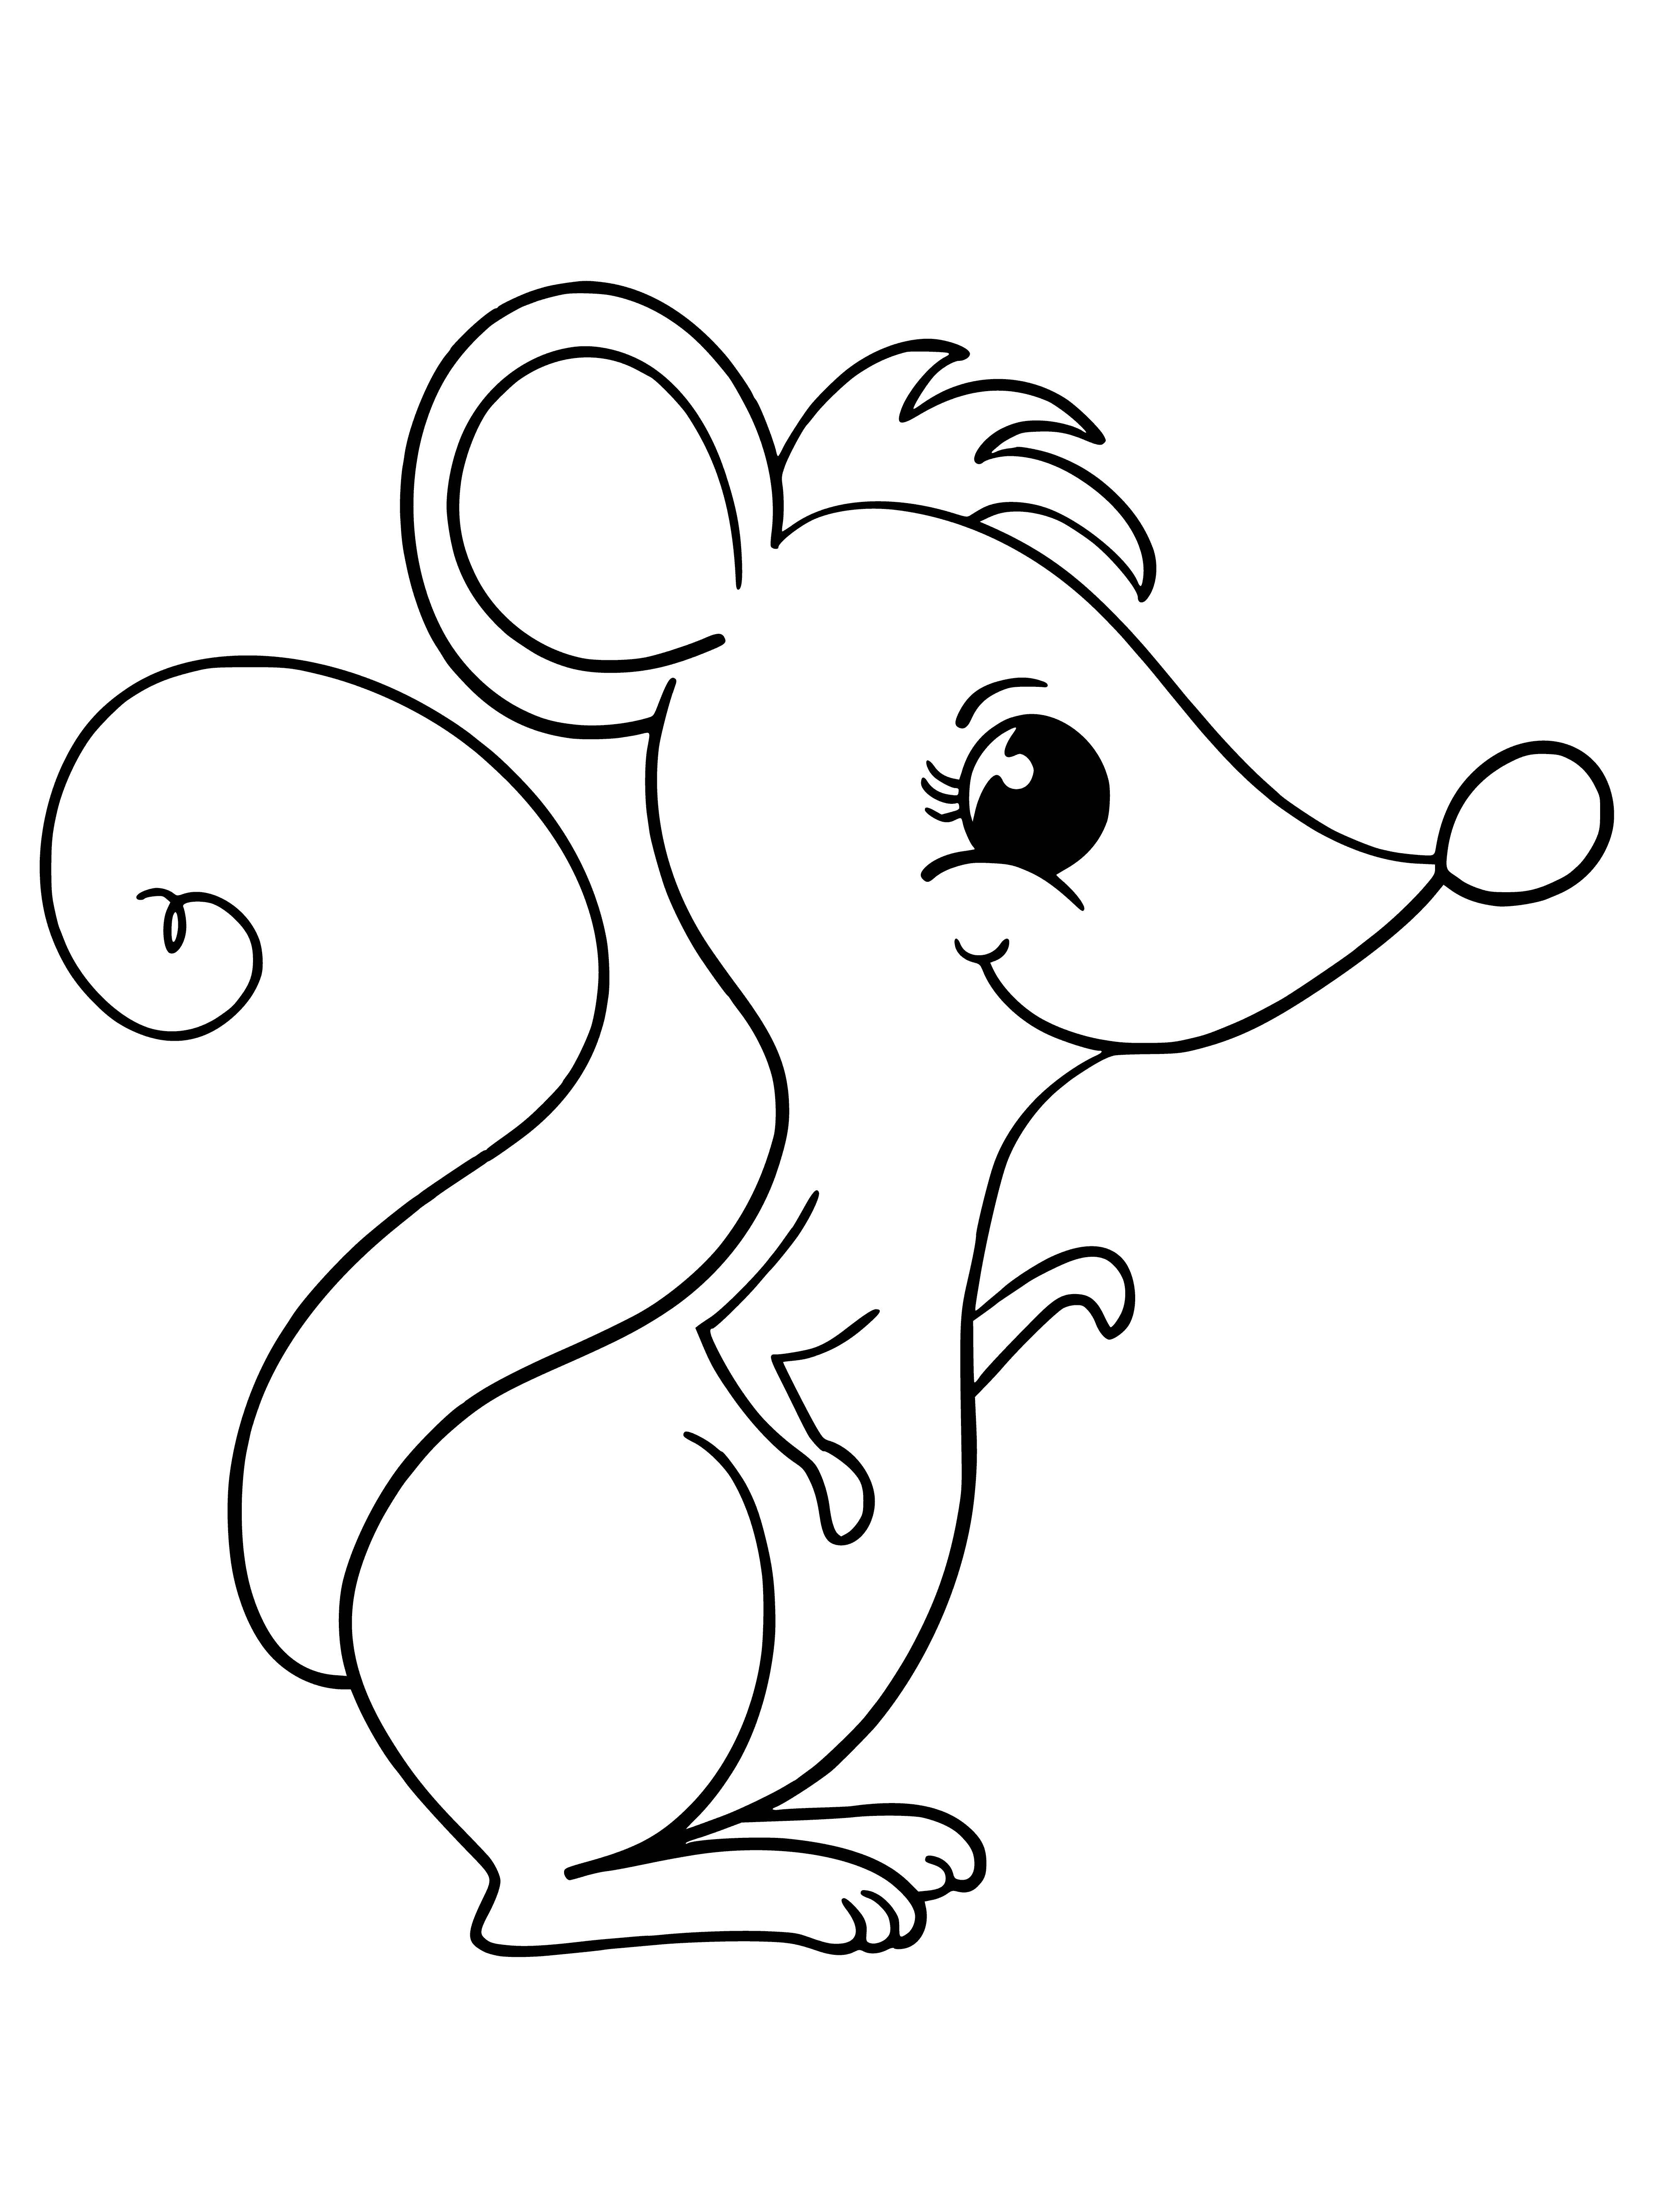 coloring page: Rat is a cute, funny-looking mouse w/ big ears, long tail, & brown/white fur.